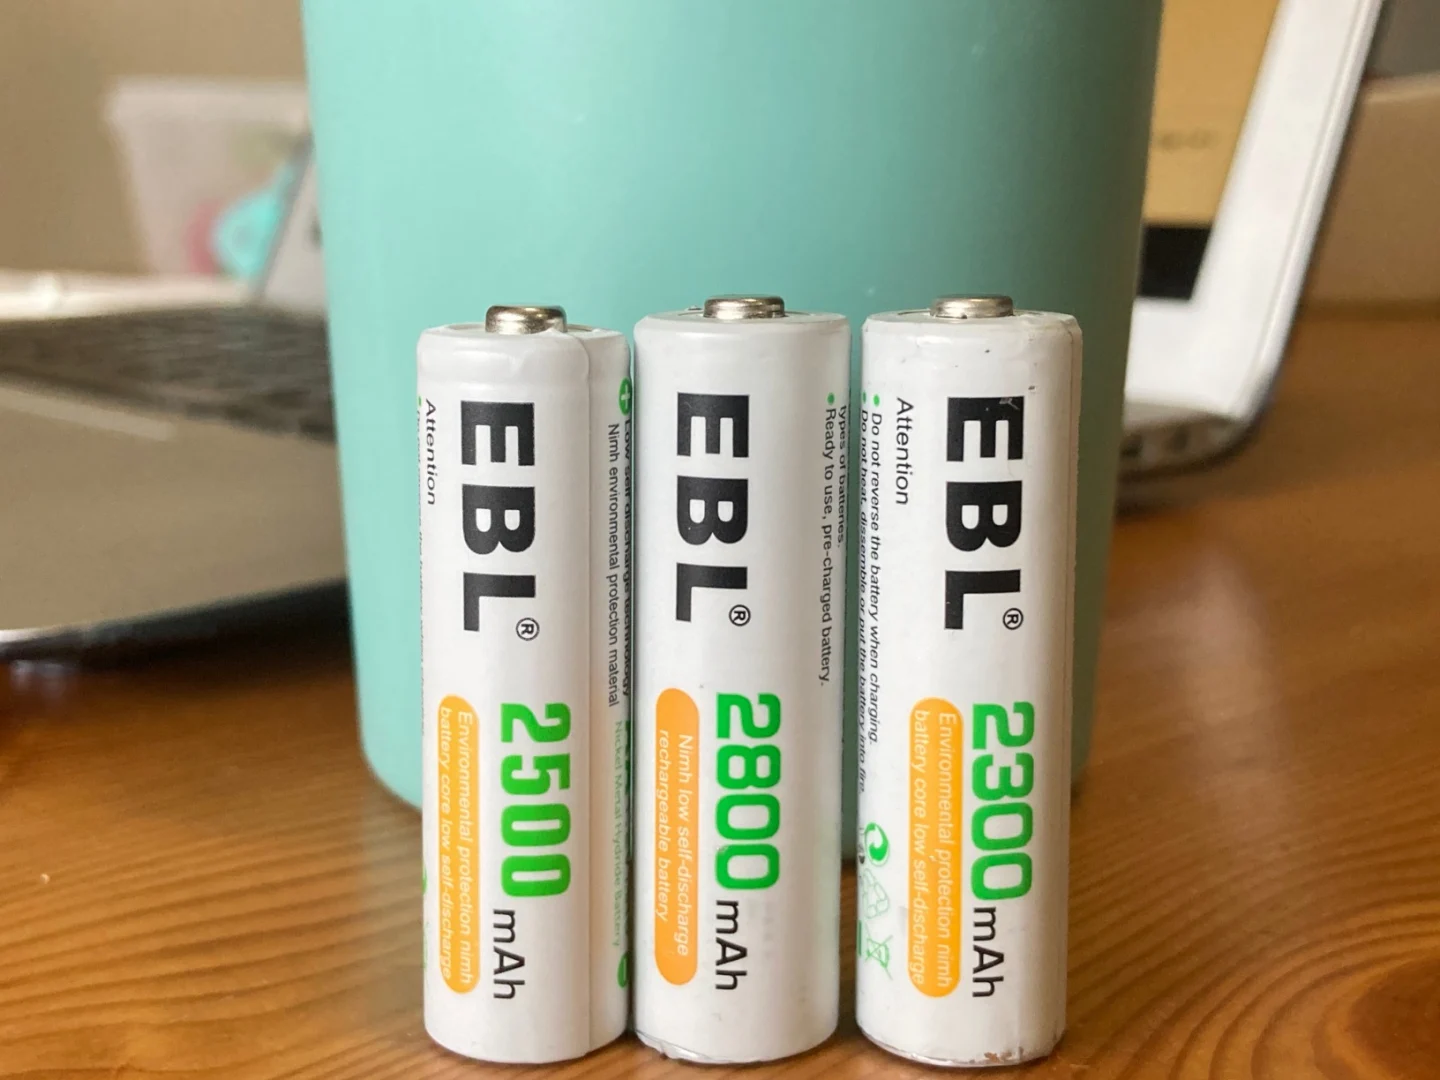 Piles AA rechargeables. 2300mAh 1.2V NiMH